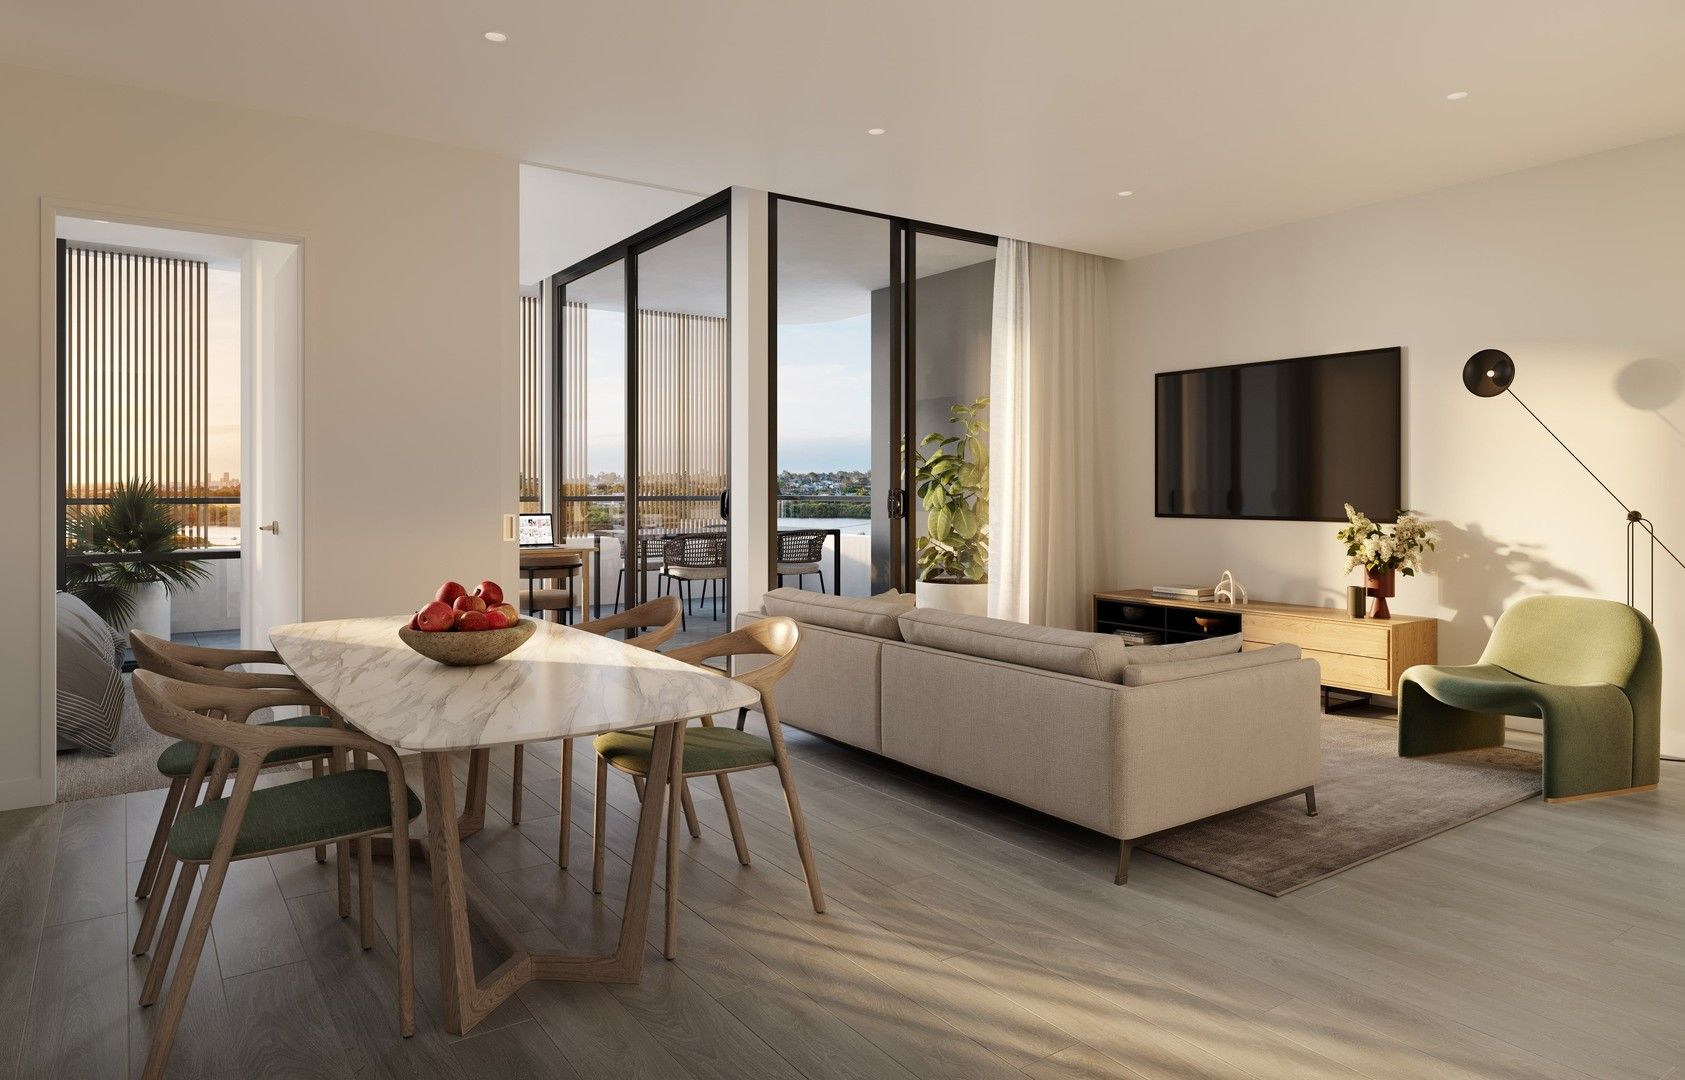 1 bedrooms New Apartments / Off the Plan in H1006/11 Wattlebird Road WENTWORTH POINT NSW, 2127